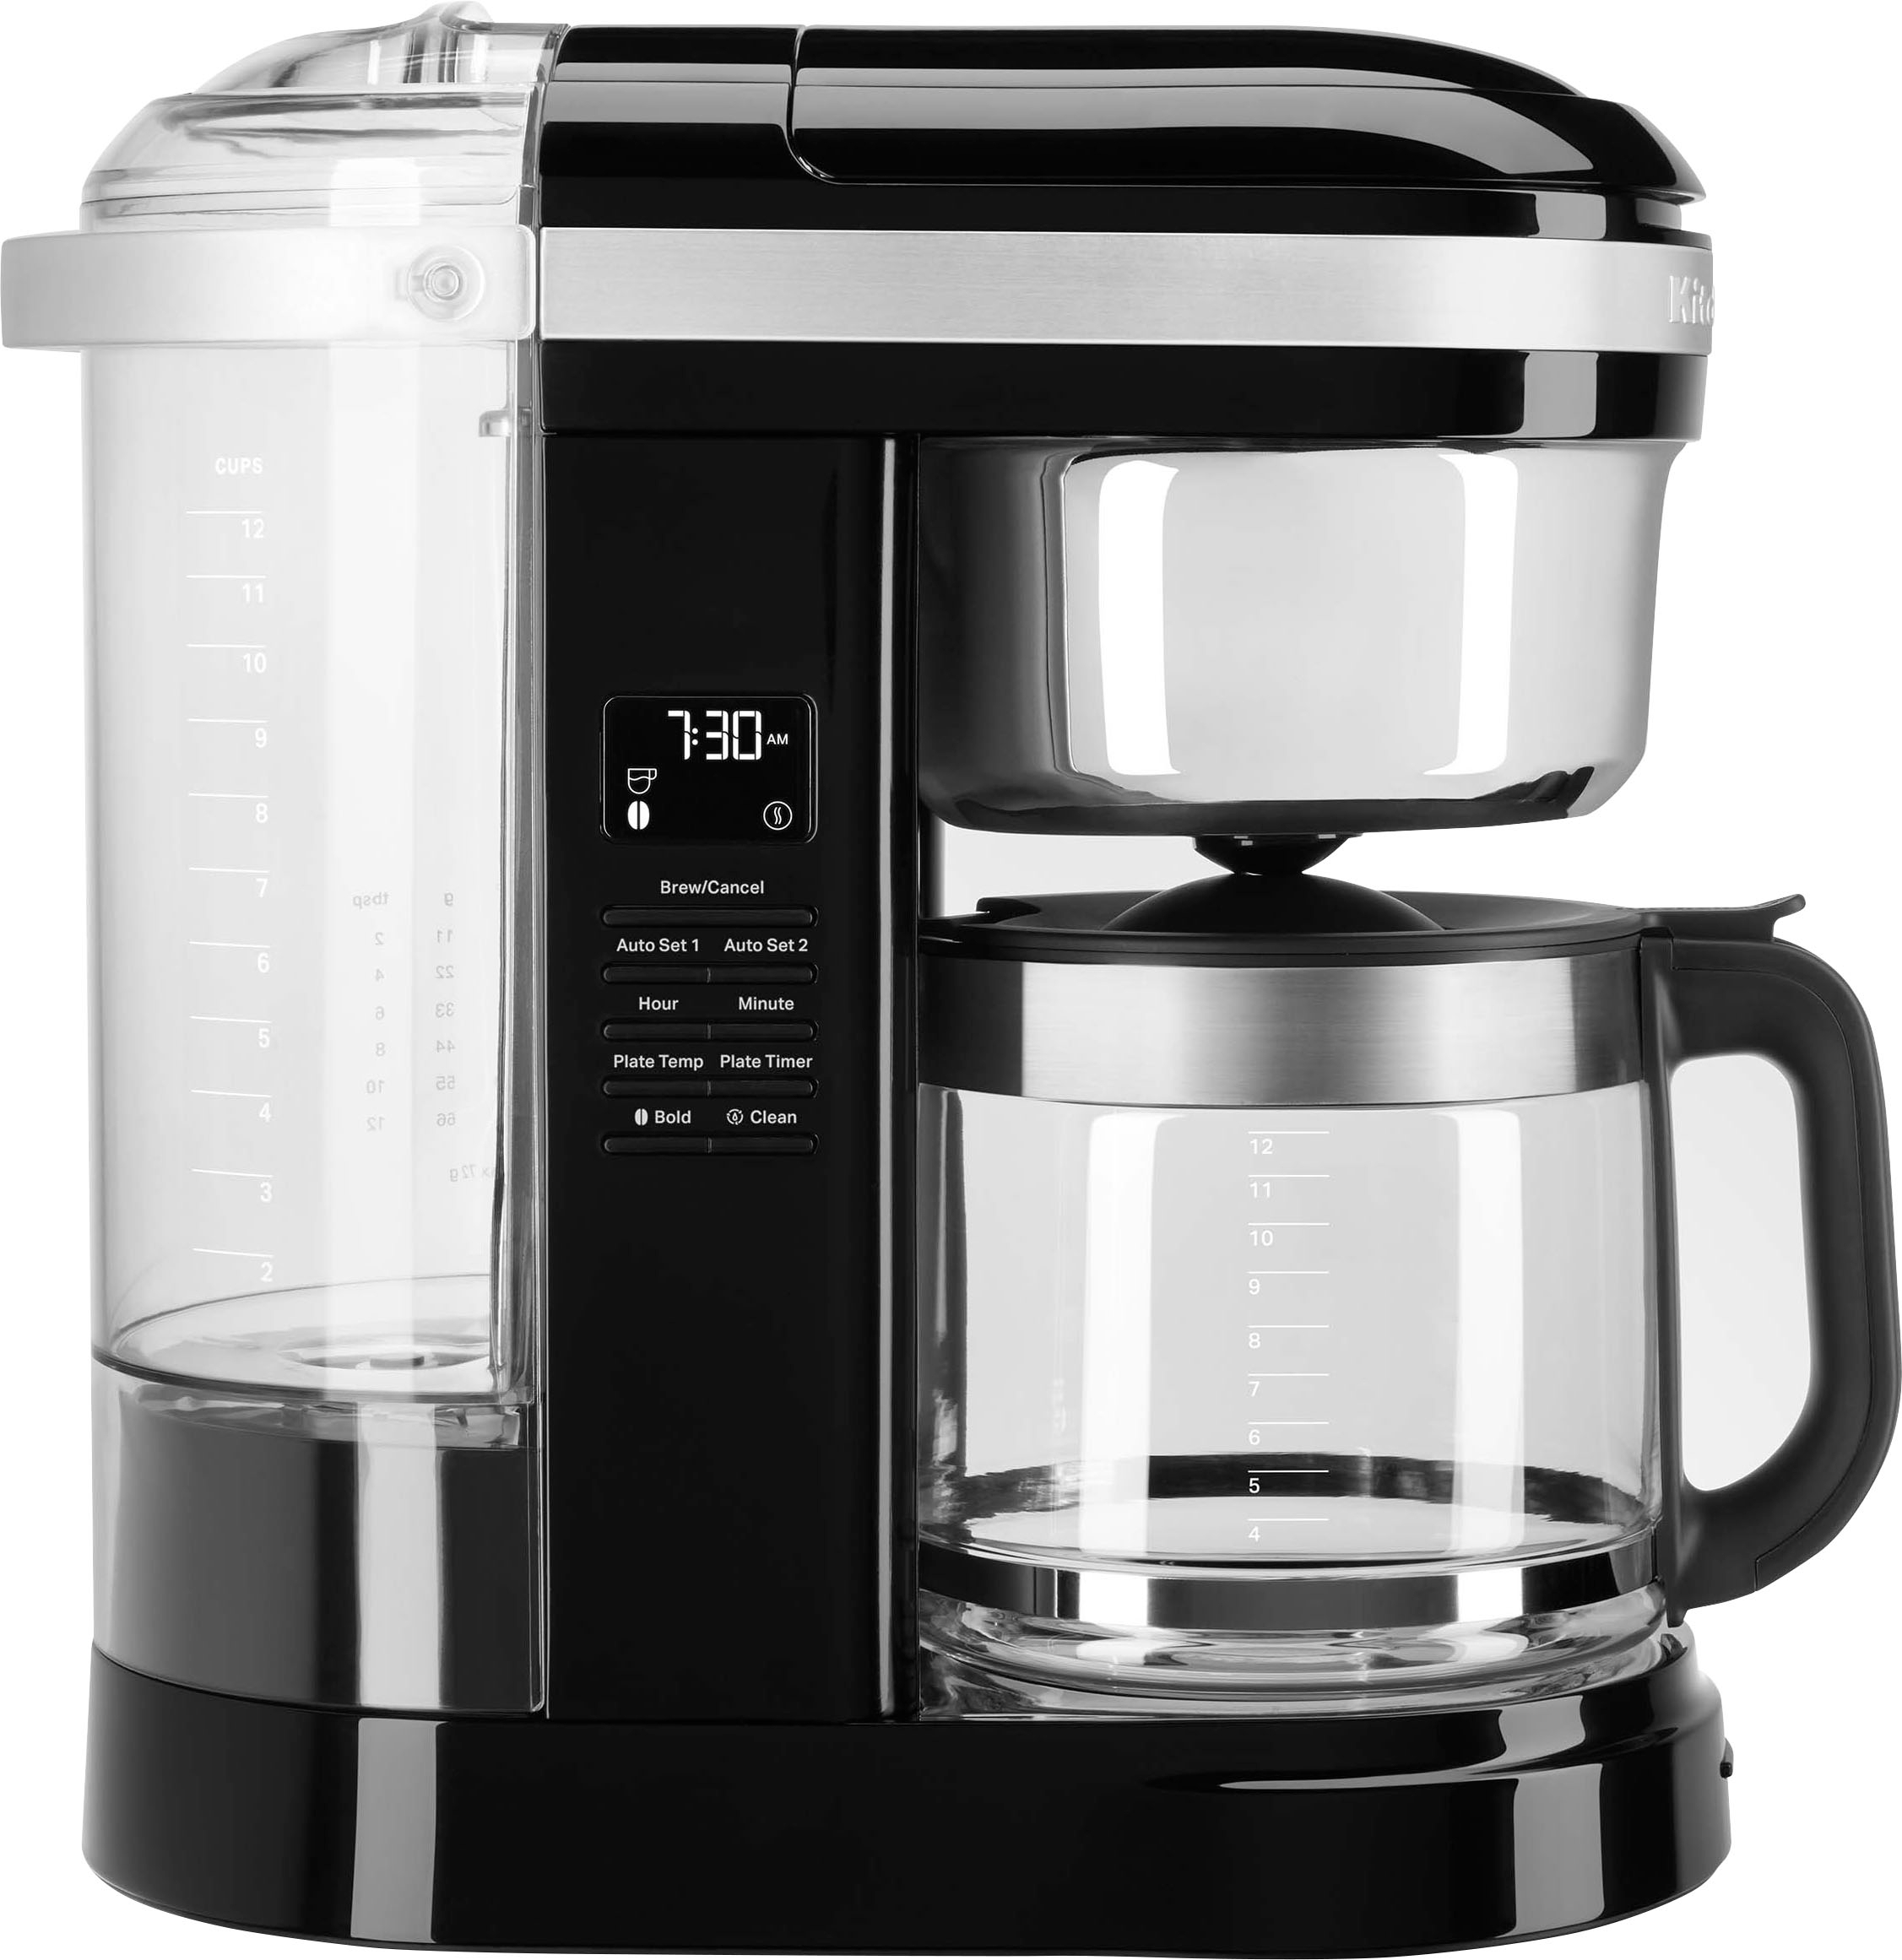 KitchenAid 12-Cup Onyx Black Residential Coffee Maker at